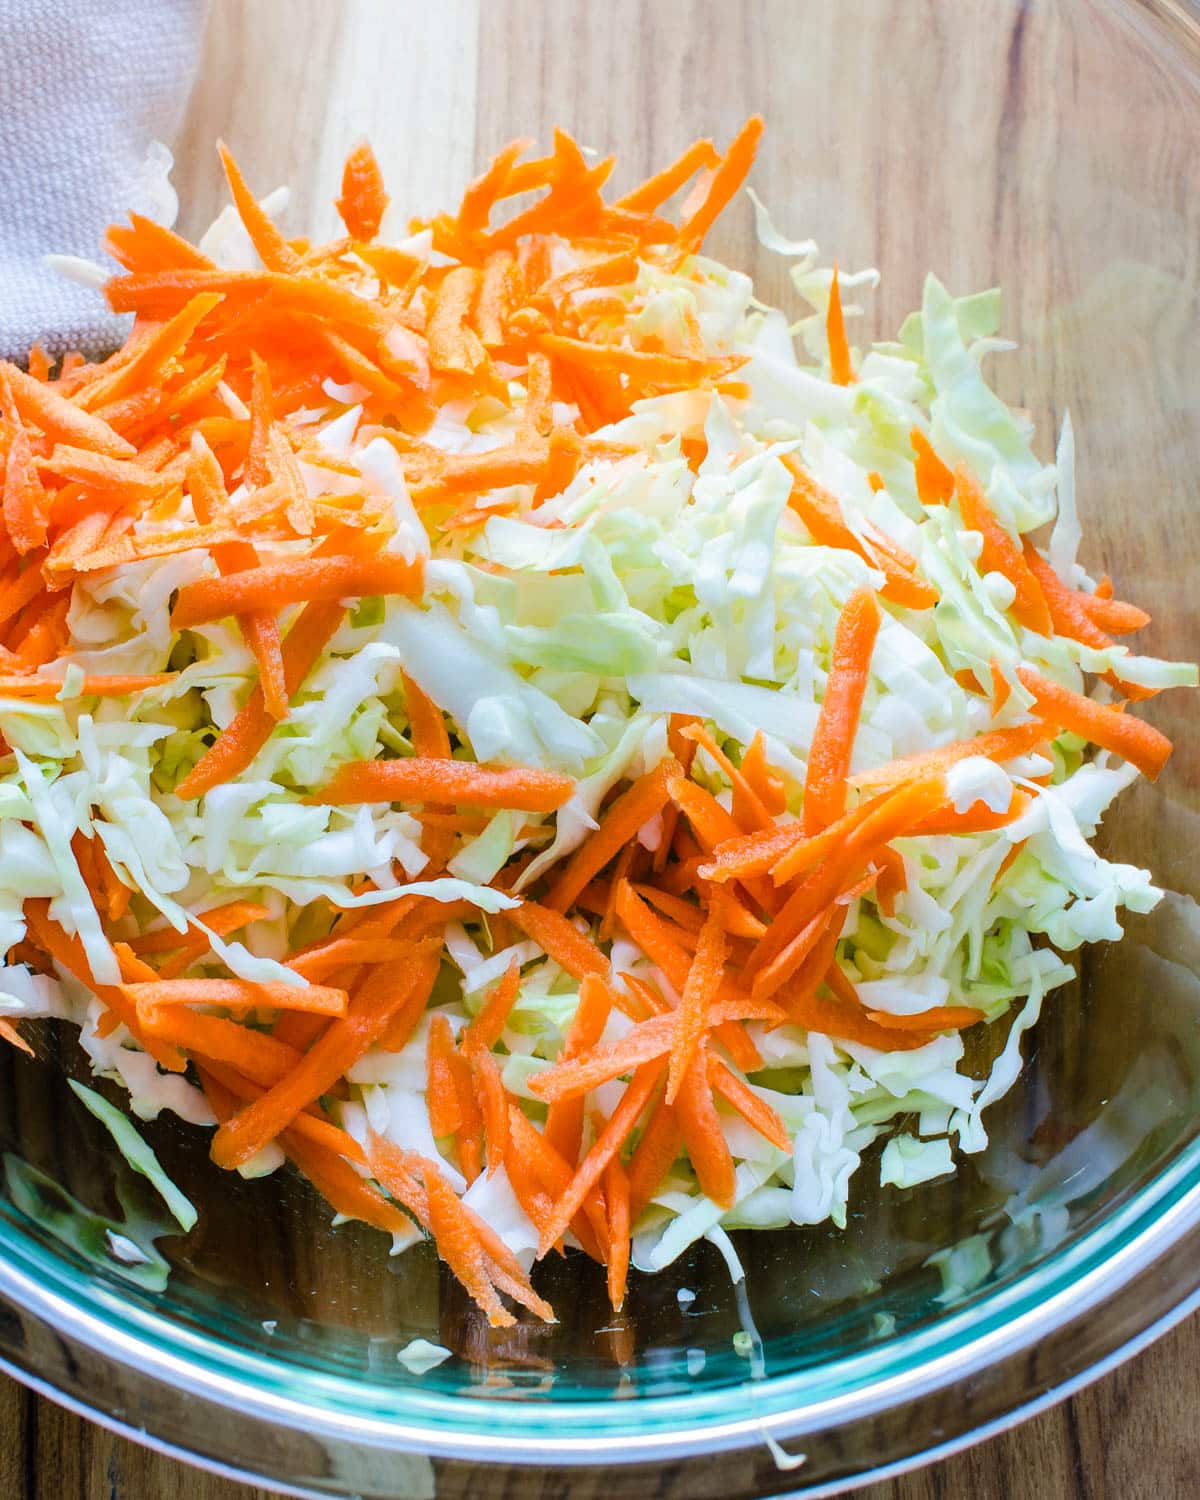 Grated cabbage and carrots in a bowl.